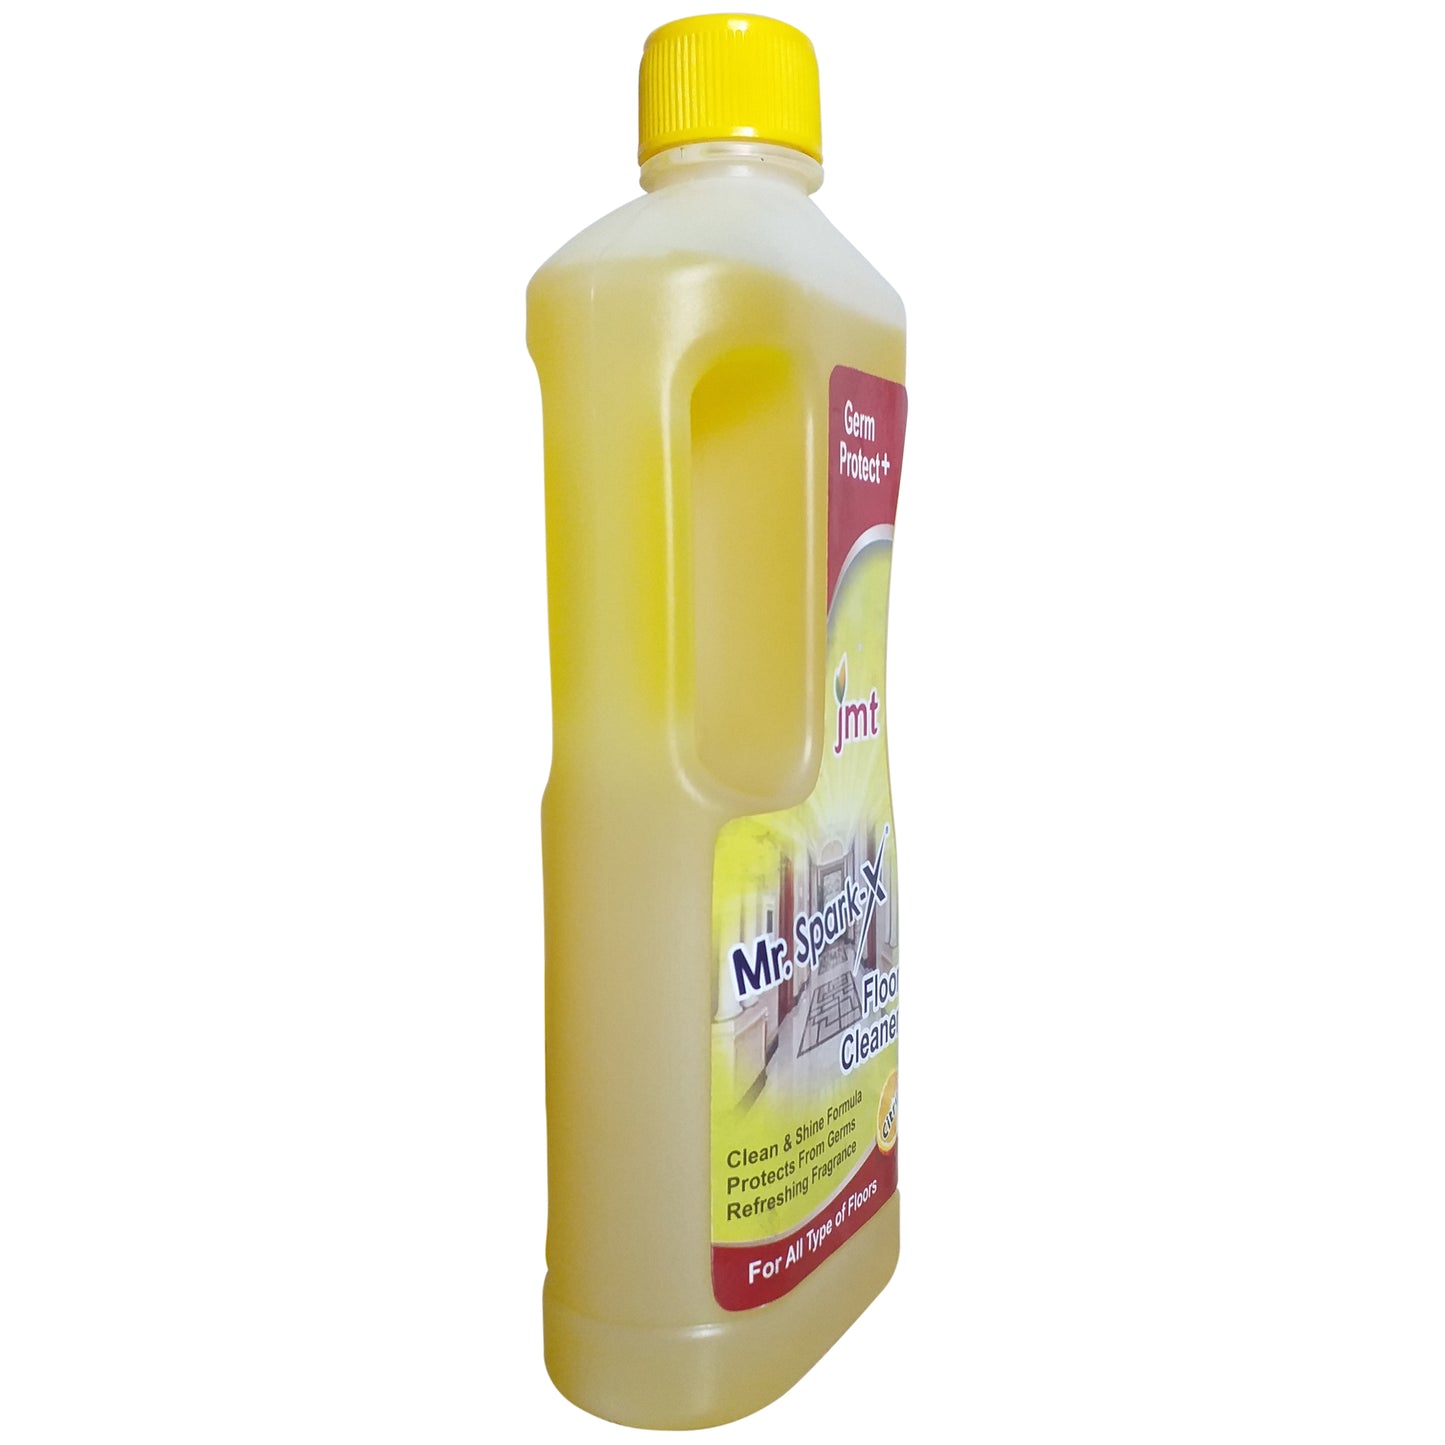 500ml Mr Spark-X Floor Cleaner with Germprotect+ Technology